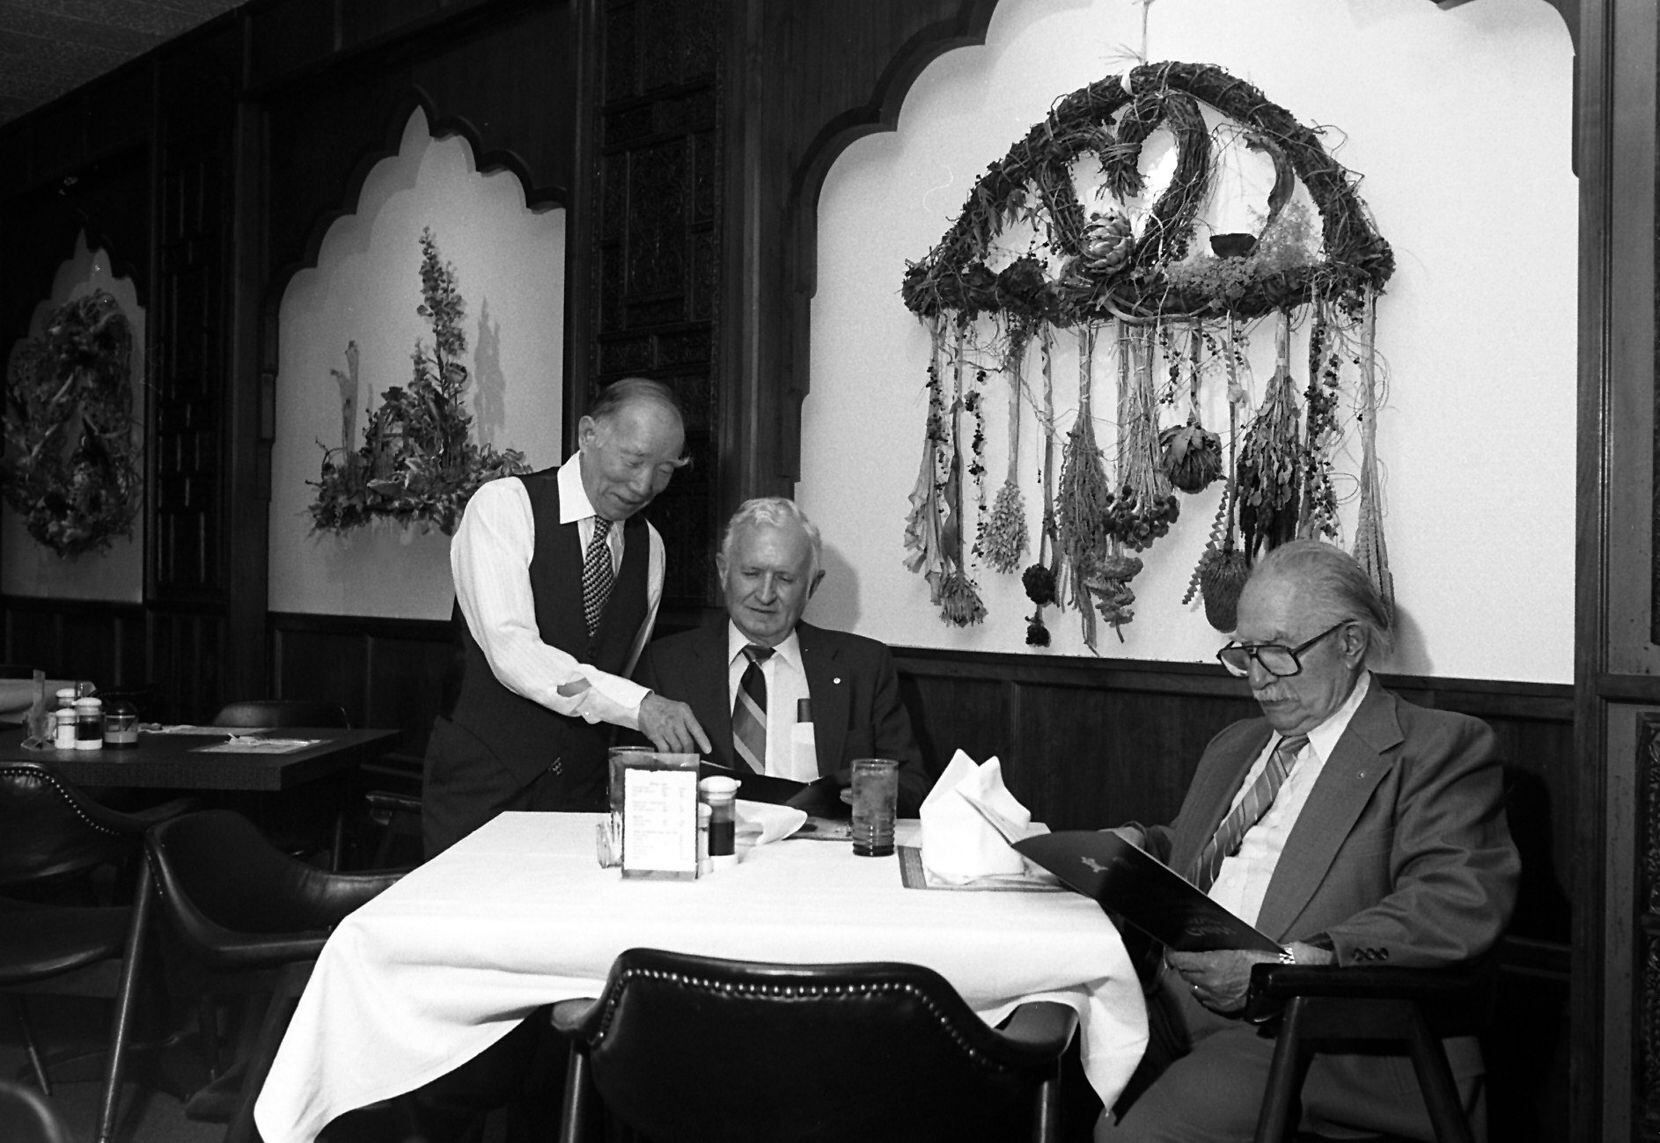 Shu-Chang "Buck" Kao discussing Royal China's menu with customers on March 30, 1995